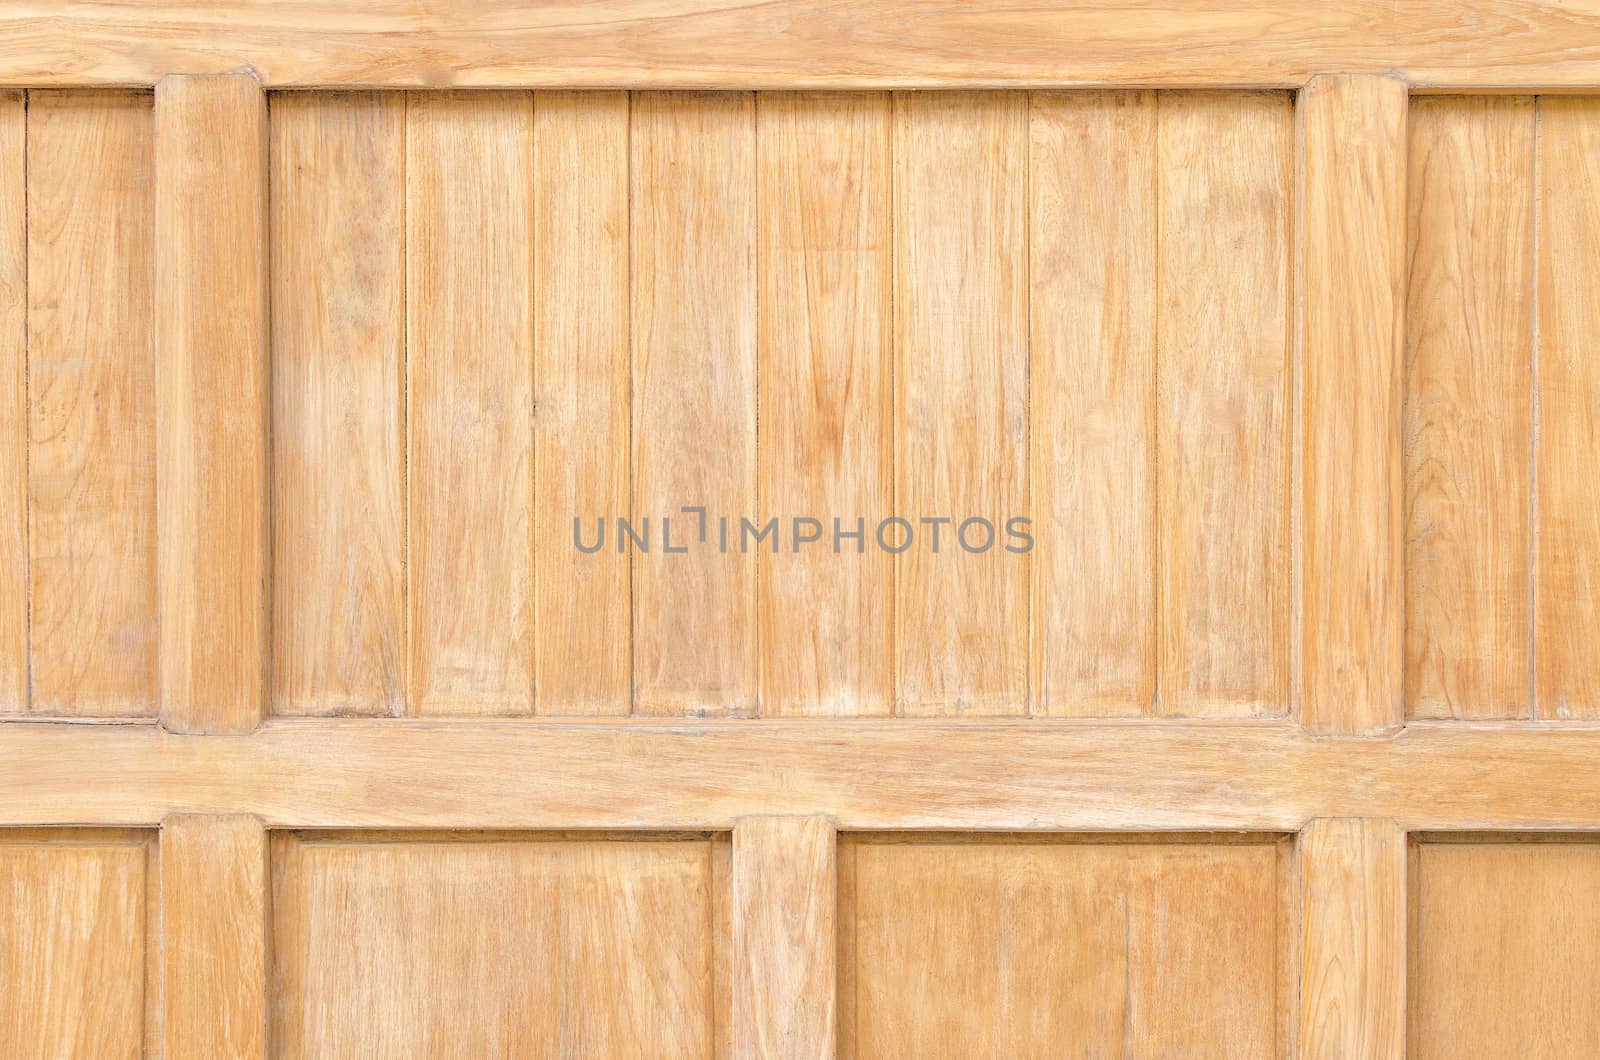 Wood plank brown texture background .